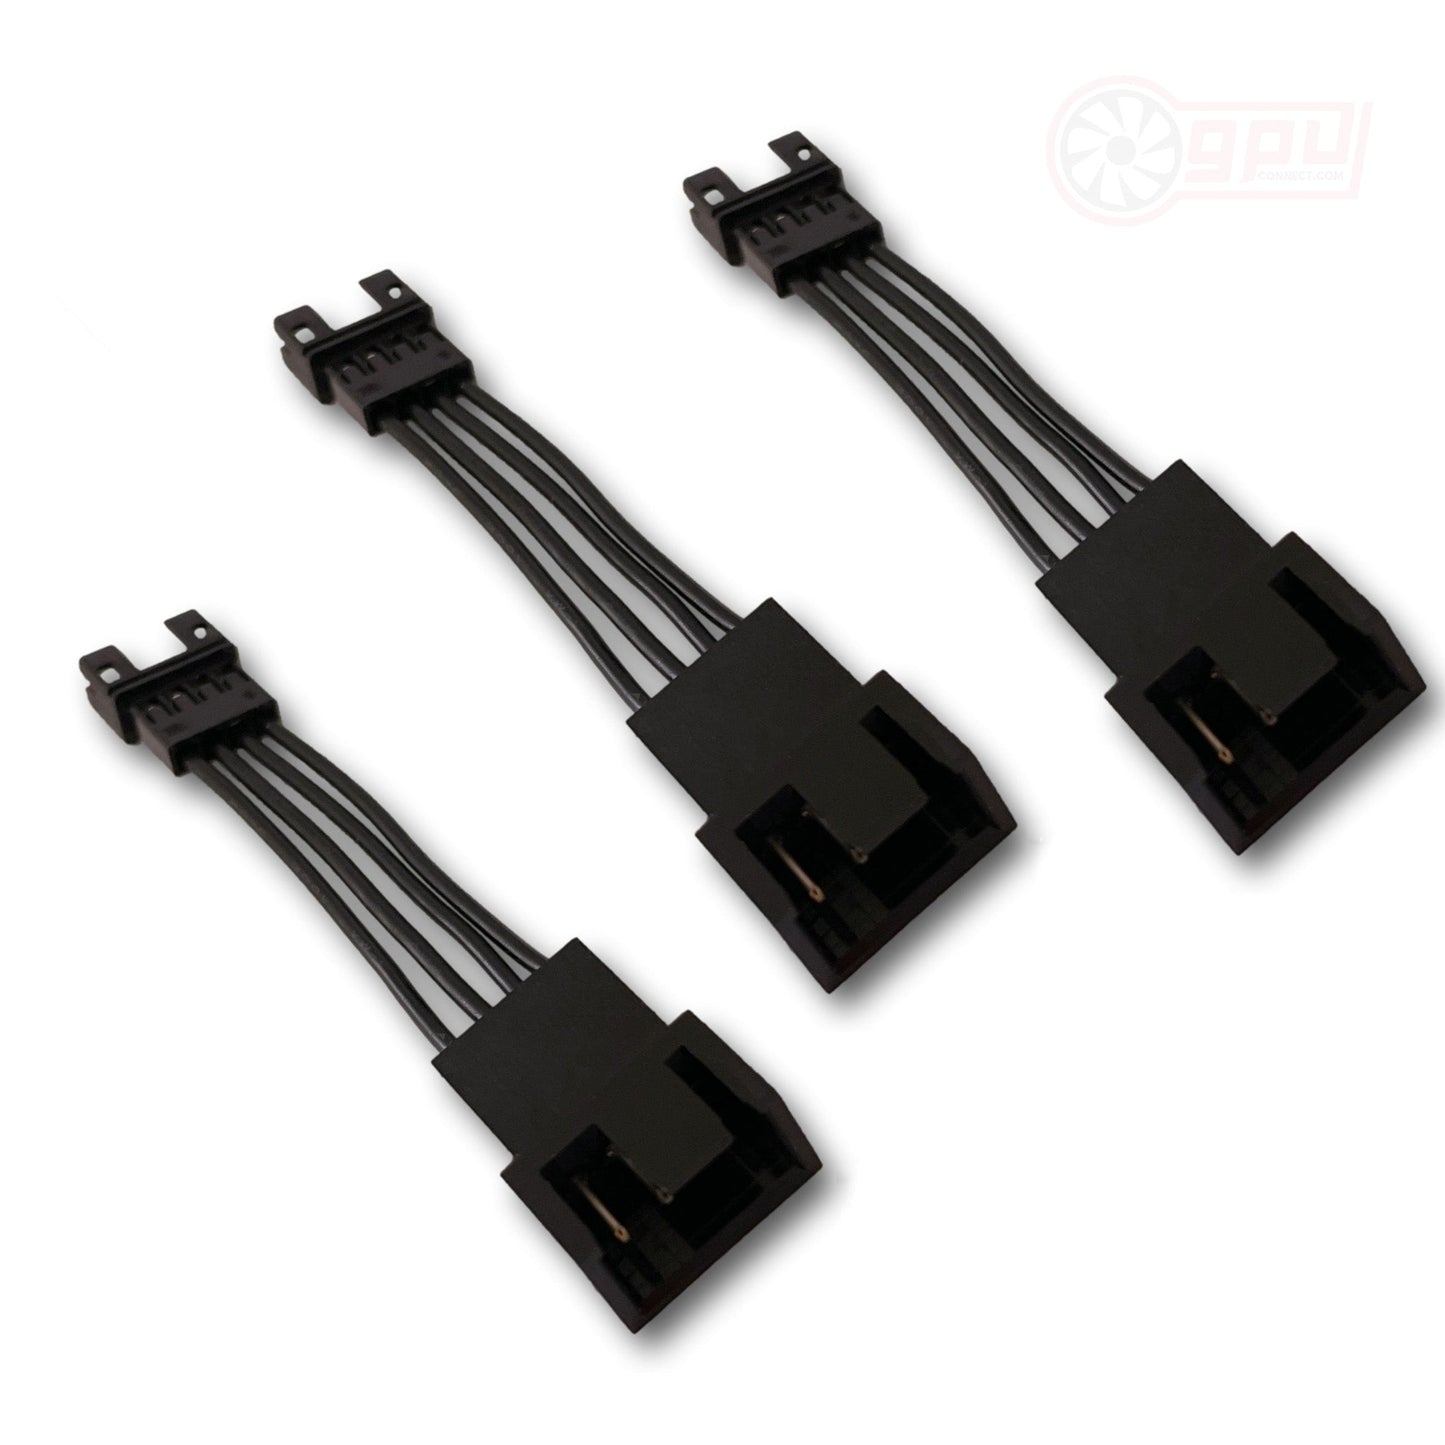 Gigabyte AORUS RTX 3090 4090 Ti WATERFORCE mini 4 Pin PH2.0 to 4 Pin PWM Fan Adapter Cable - GPUCONNECT.COM